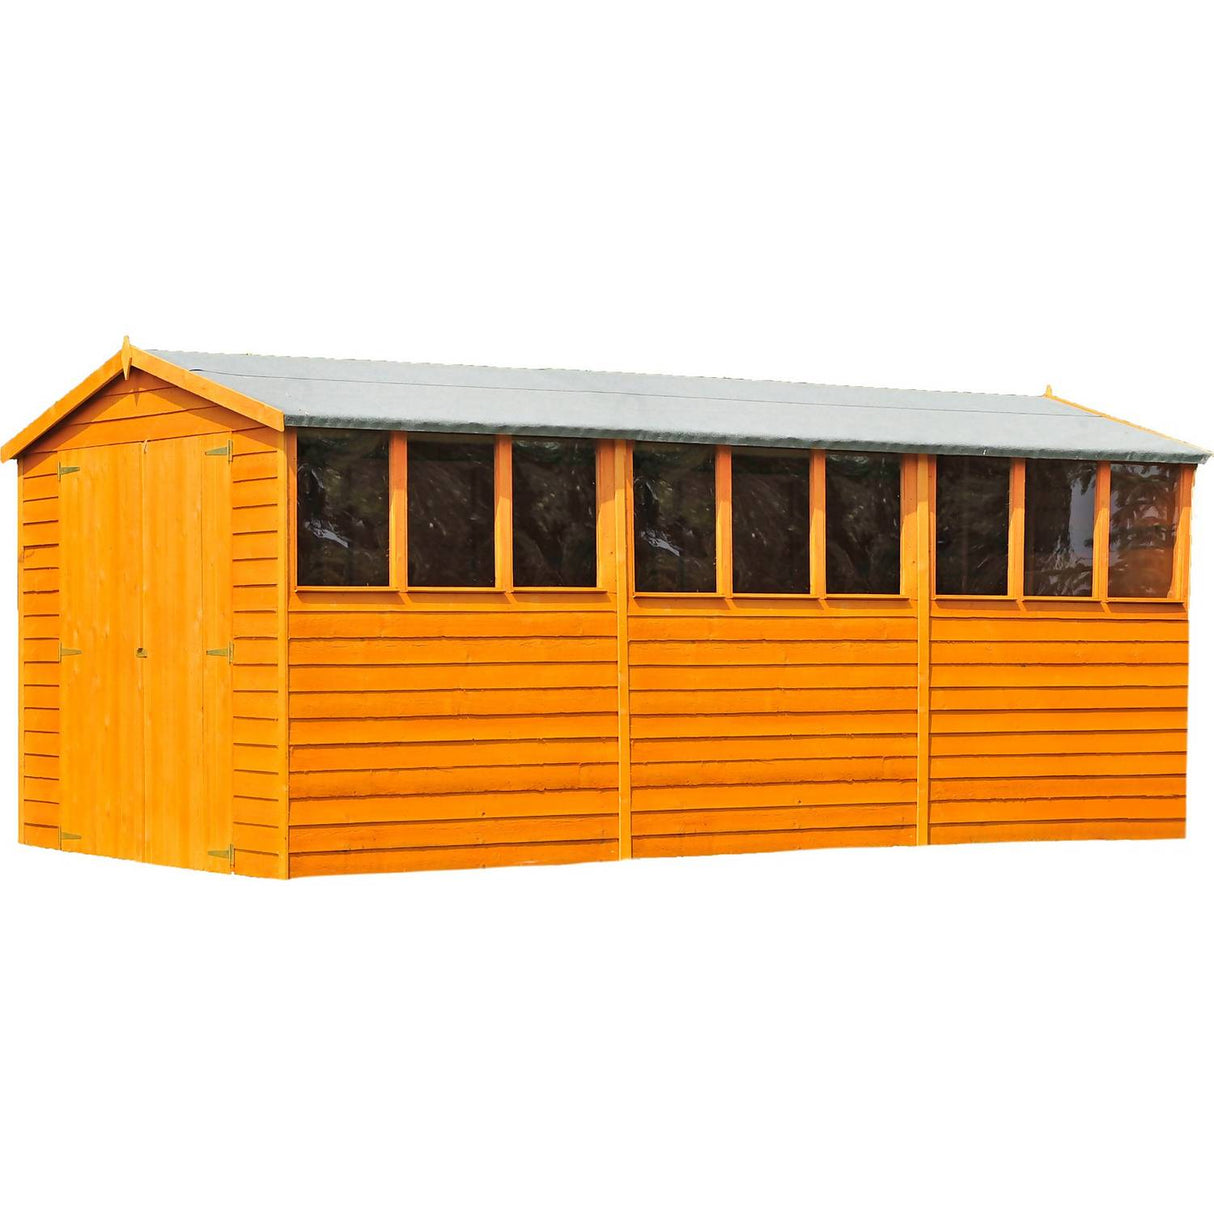 Shire Overlap Garden Shed 10x15 with Double Doors